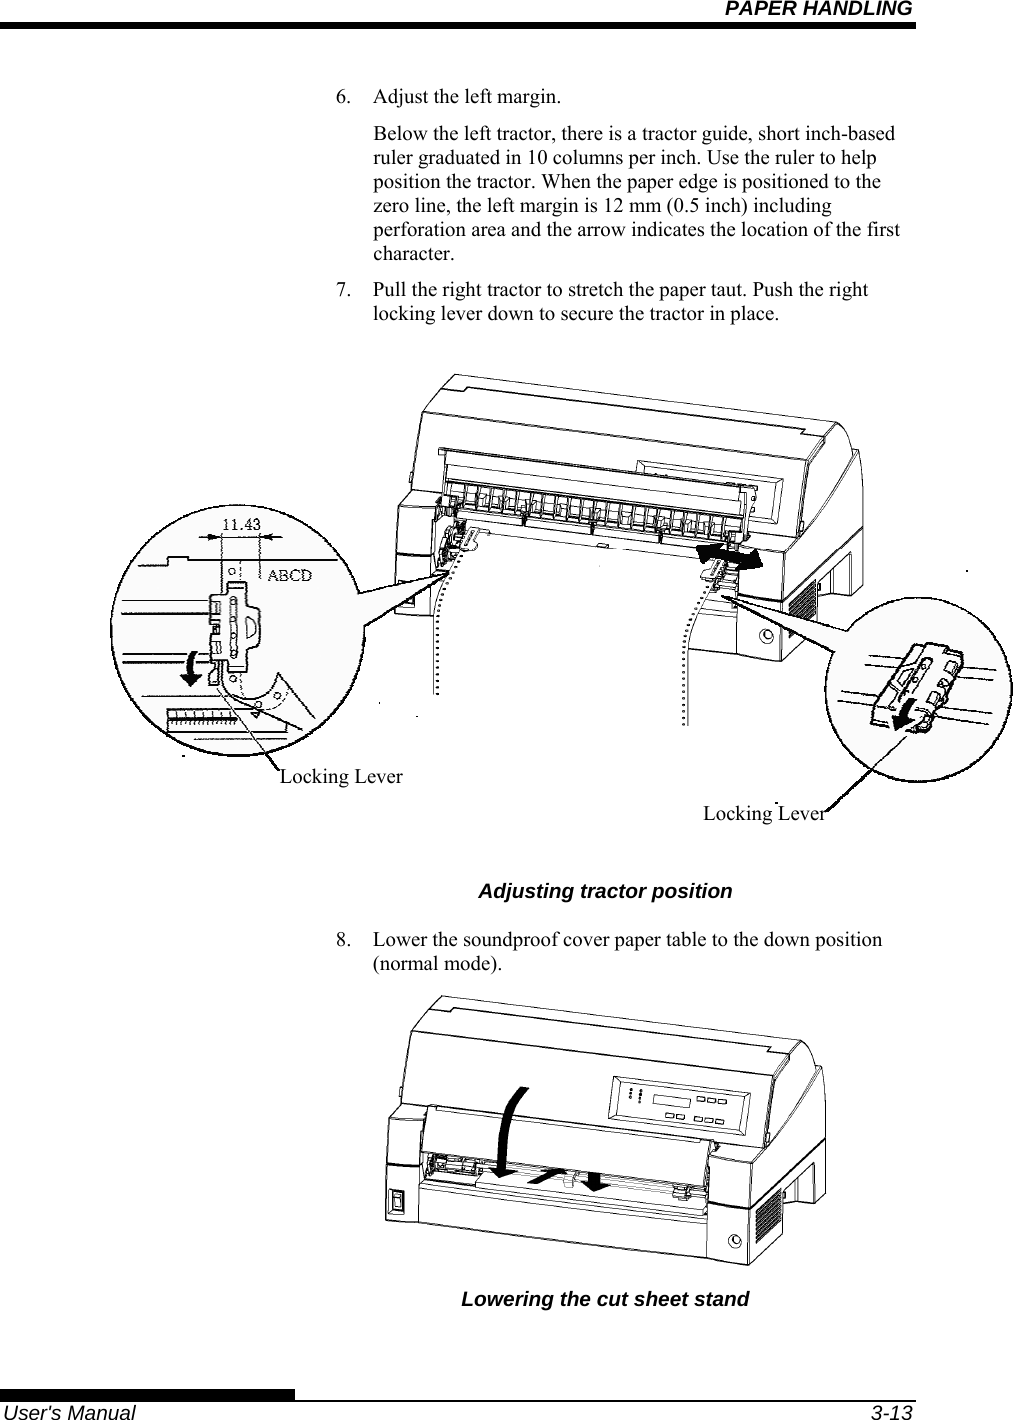 PAPER HANDLING   User&apos;s Manual  3-13 6.  Adjust the left margin. Below the left tractor, there is a tractor guide, short inch-based ruler graduated in 10 columns per inch. Use the ruler to help position the tractor. When the paper edge is positioned to the zero line, the left margin is 12 mm (0.5 inch) including perforation area and the arrow indicates the location of the first character. 7.  Pull the right tractor to stretch the paper taut. Push the right locking lever down to secure the tractor in place.                              Adjusting tractor position 8.  Lower the soundproof cover paper table to the down position (normal mode).  Lowering the cut sheet stand  Locking Lever Locking Lever 